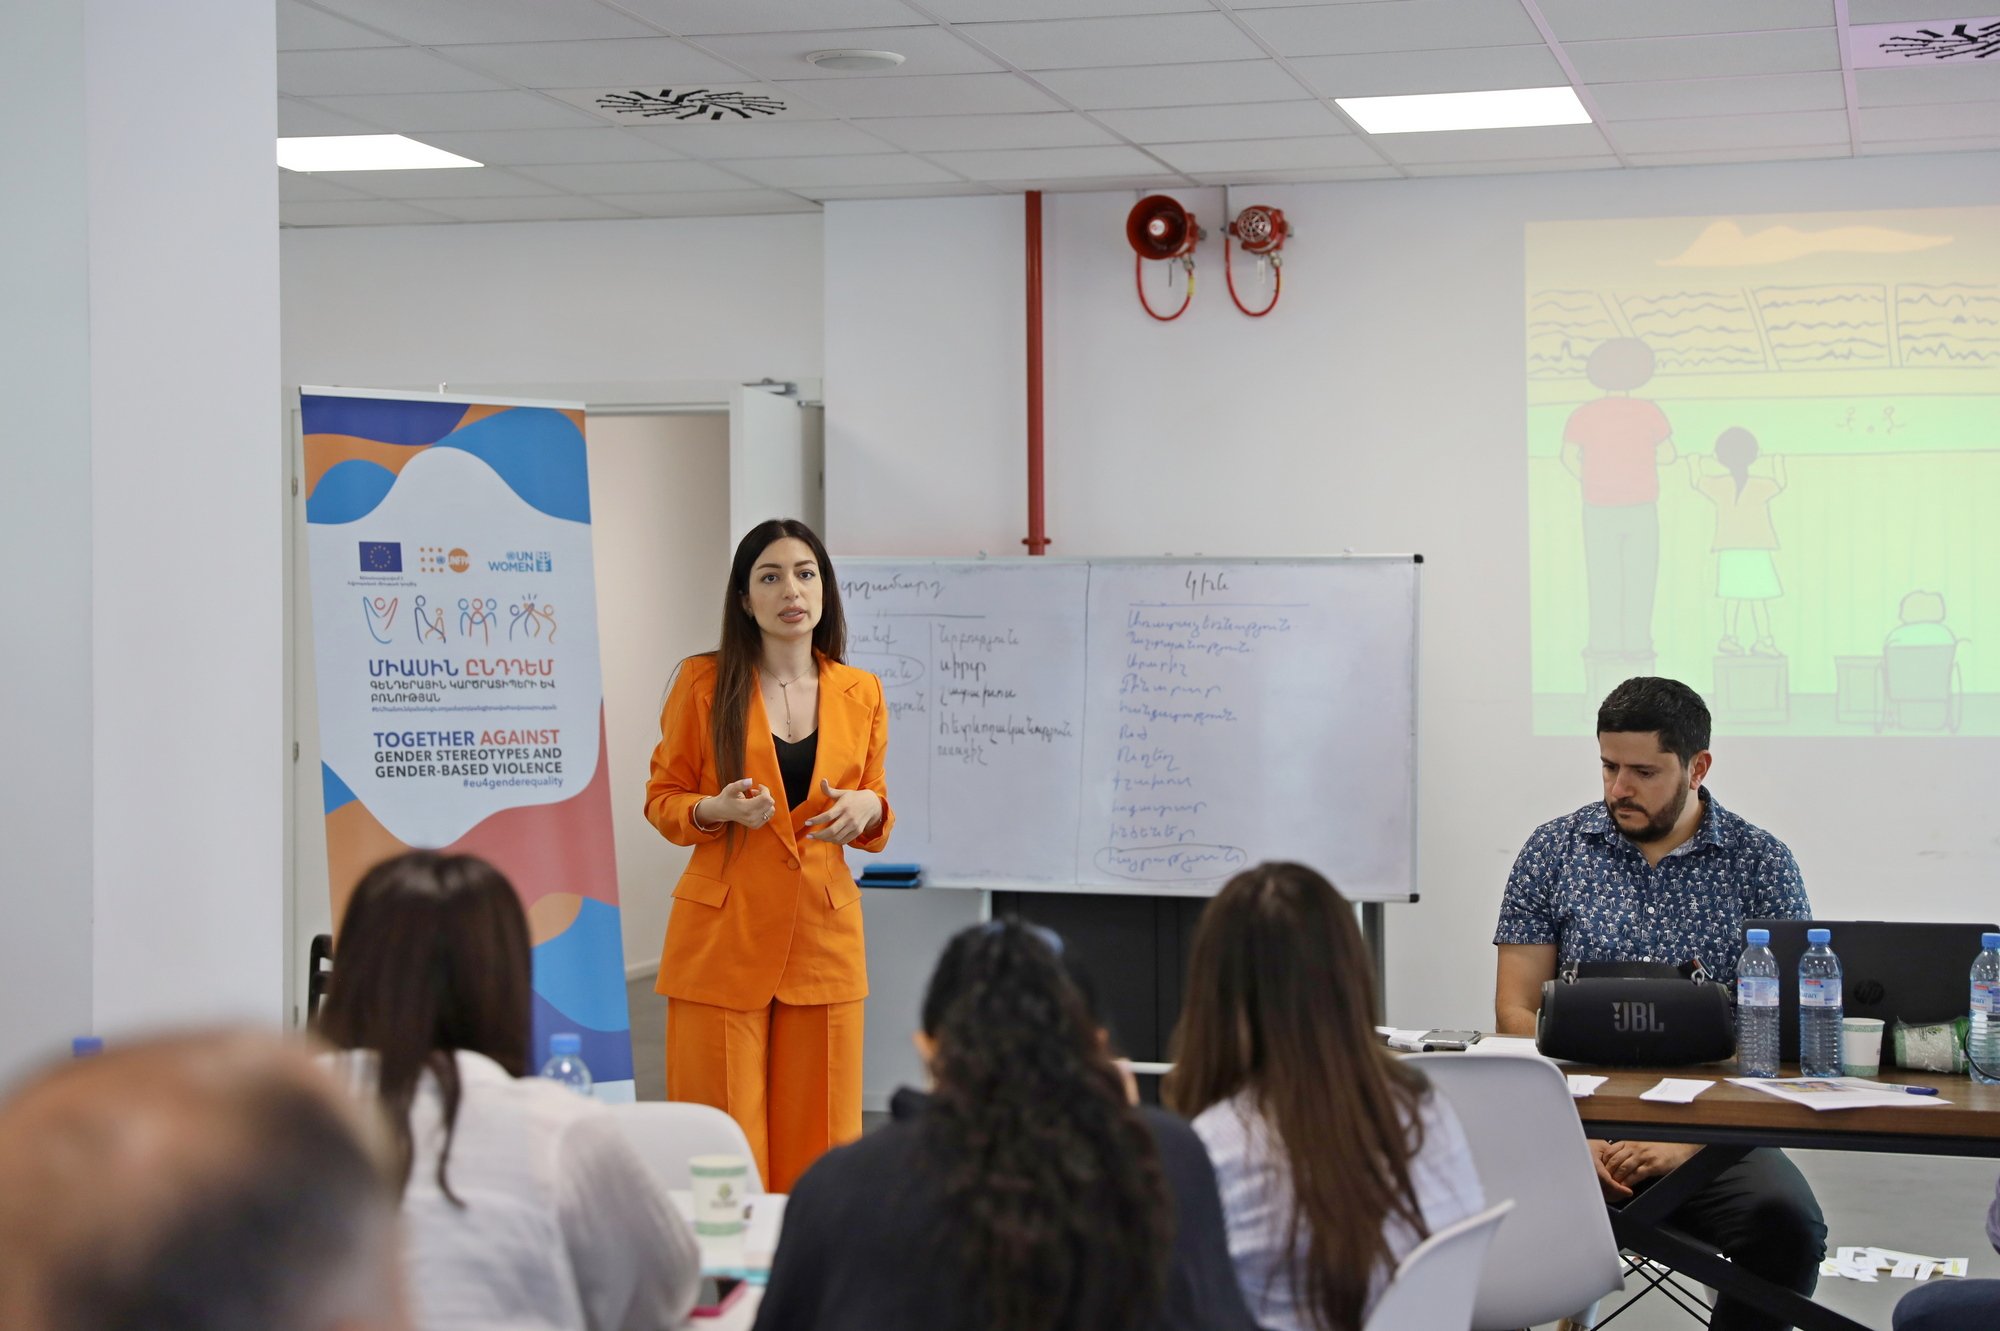 Taguhi Harutyunyan, Programme Analyst at the UNFPA Armenia office at the workshop, gives a welcoming speech